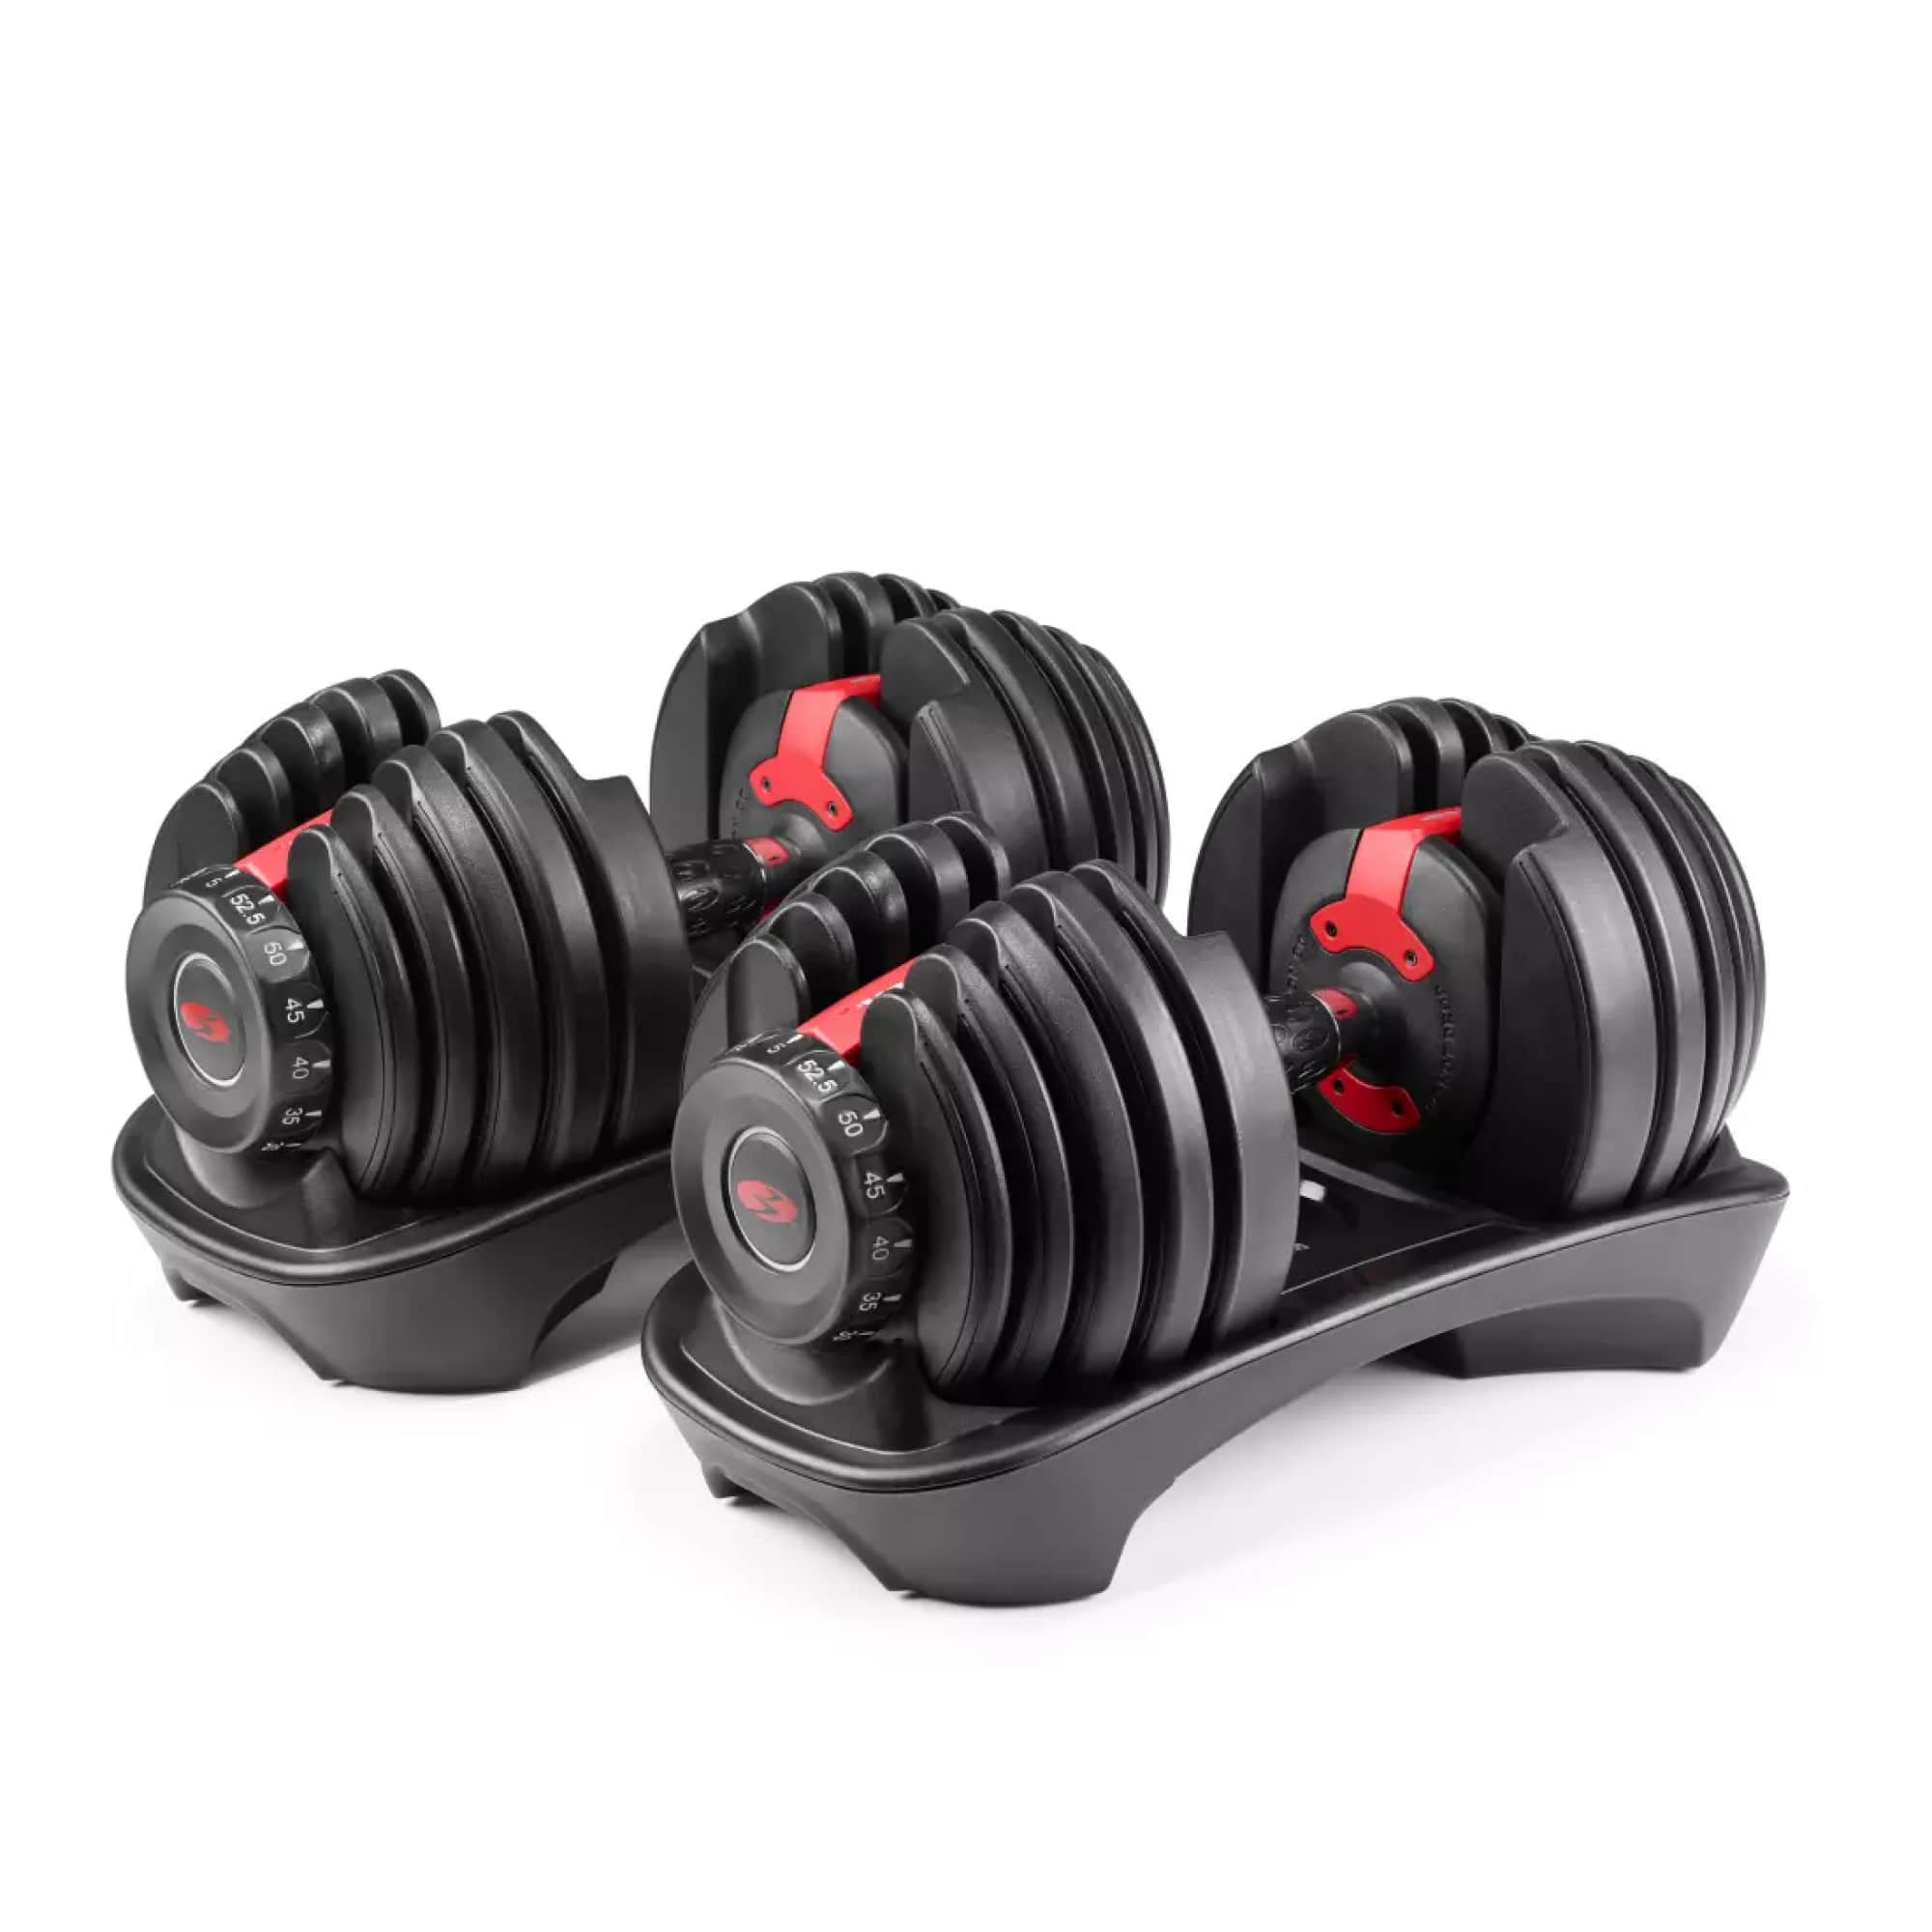 blowflex selecttech dumbells as one of the many gift ideas for staff